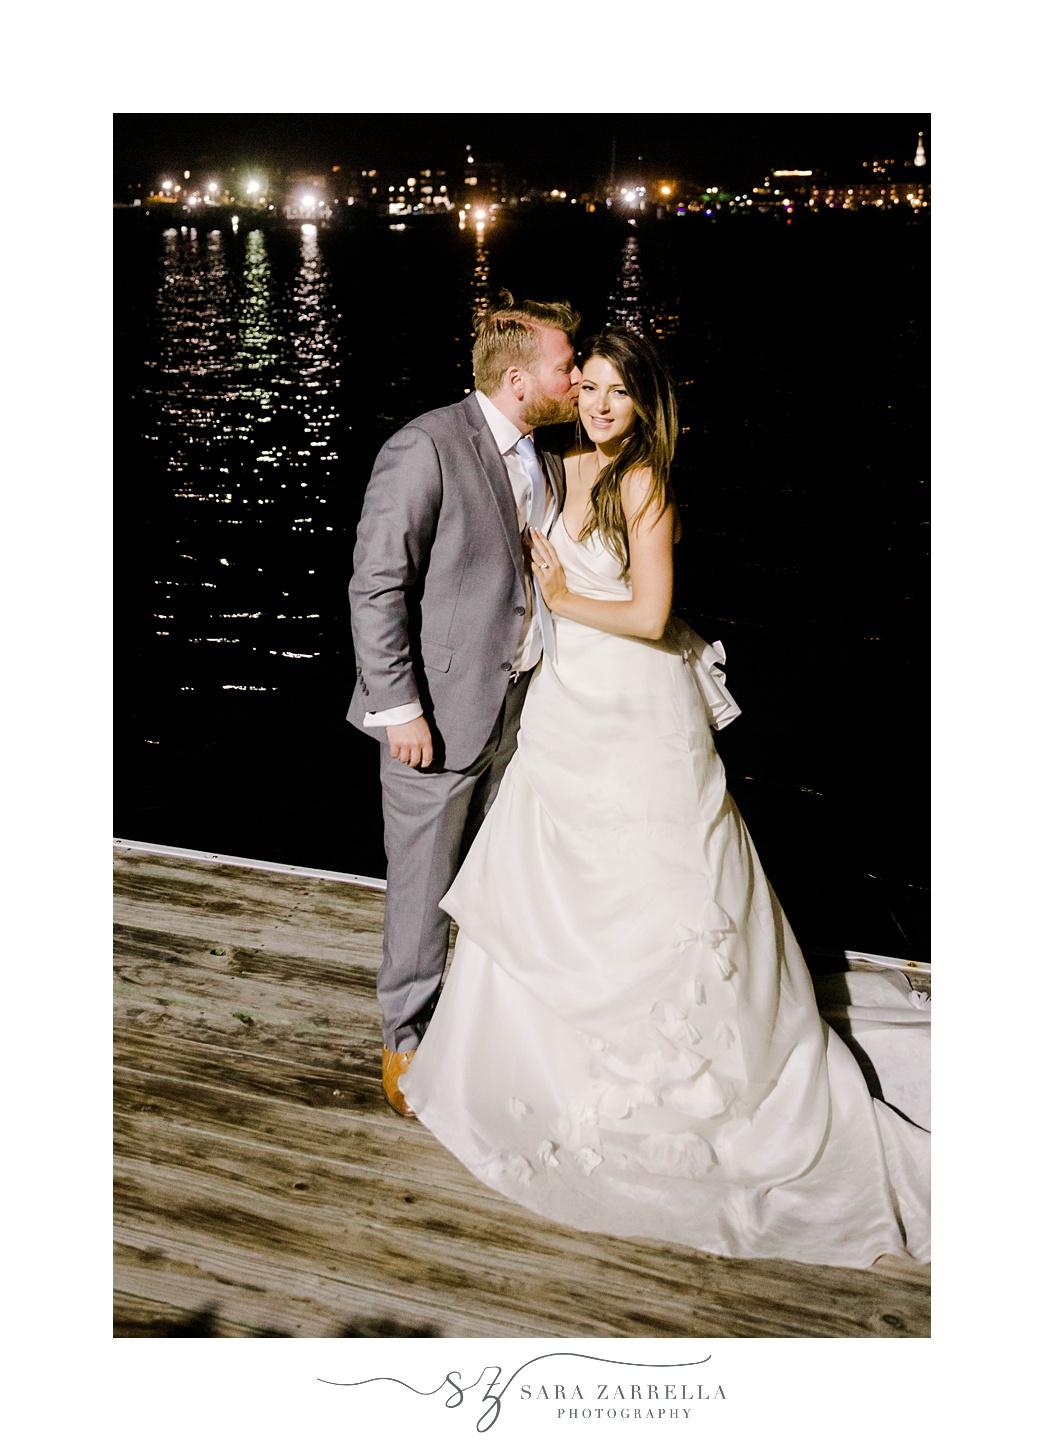 groom kisses bride's forehead during night portraits on dock in Newport RI